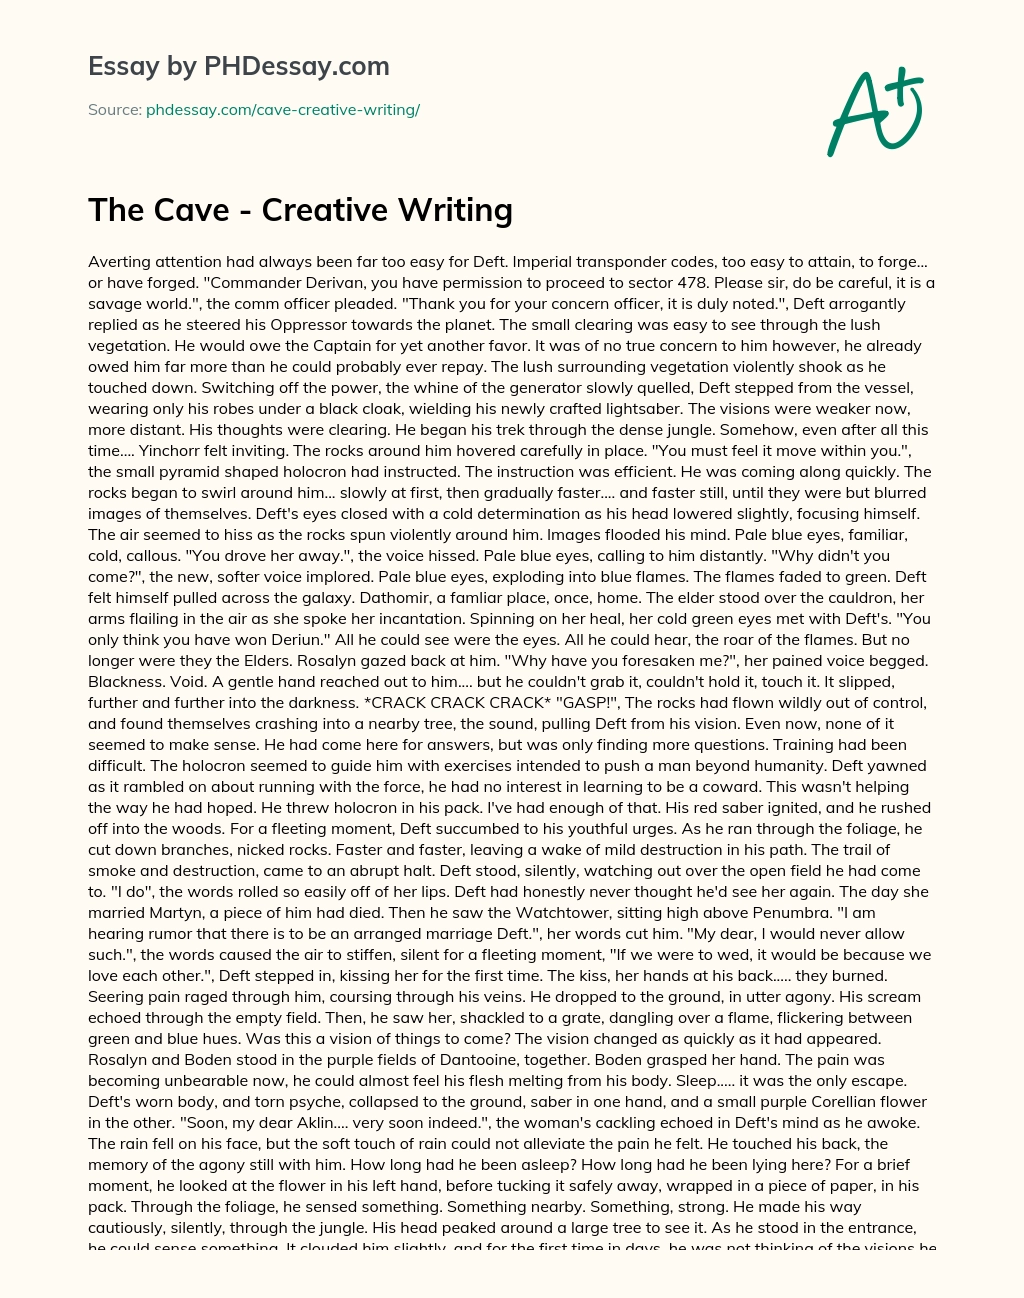 The Cave – Creative Writing essay